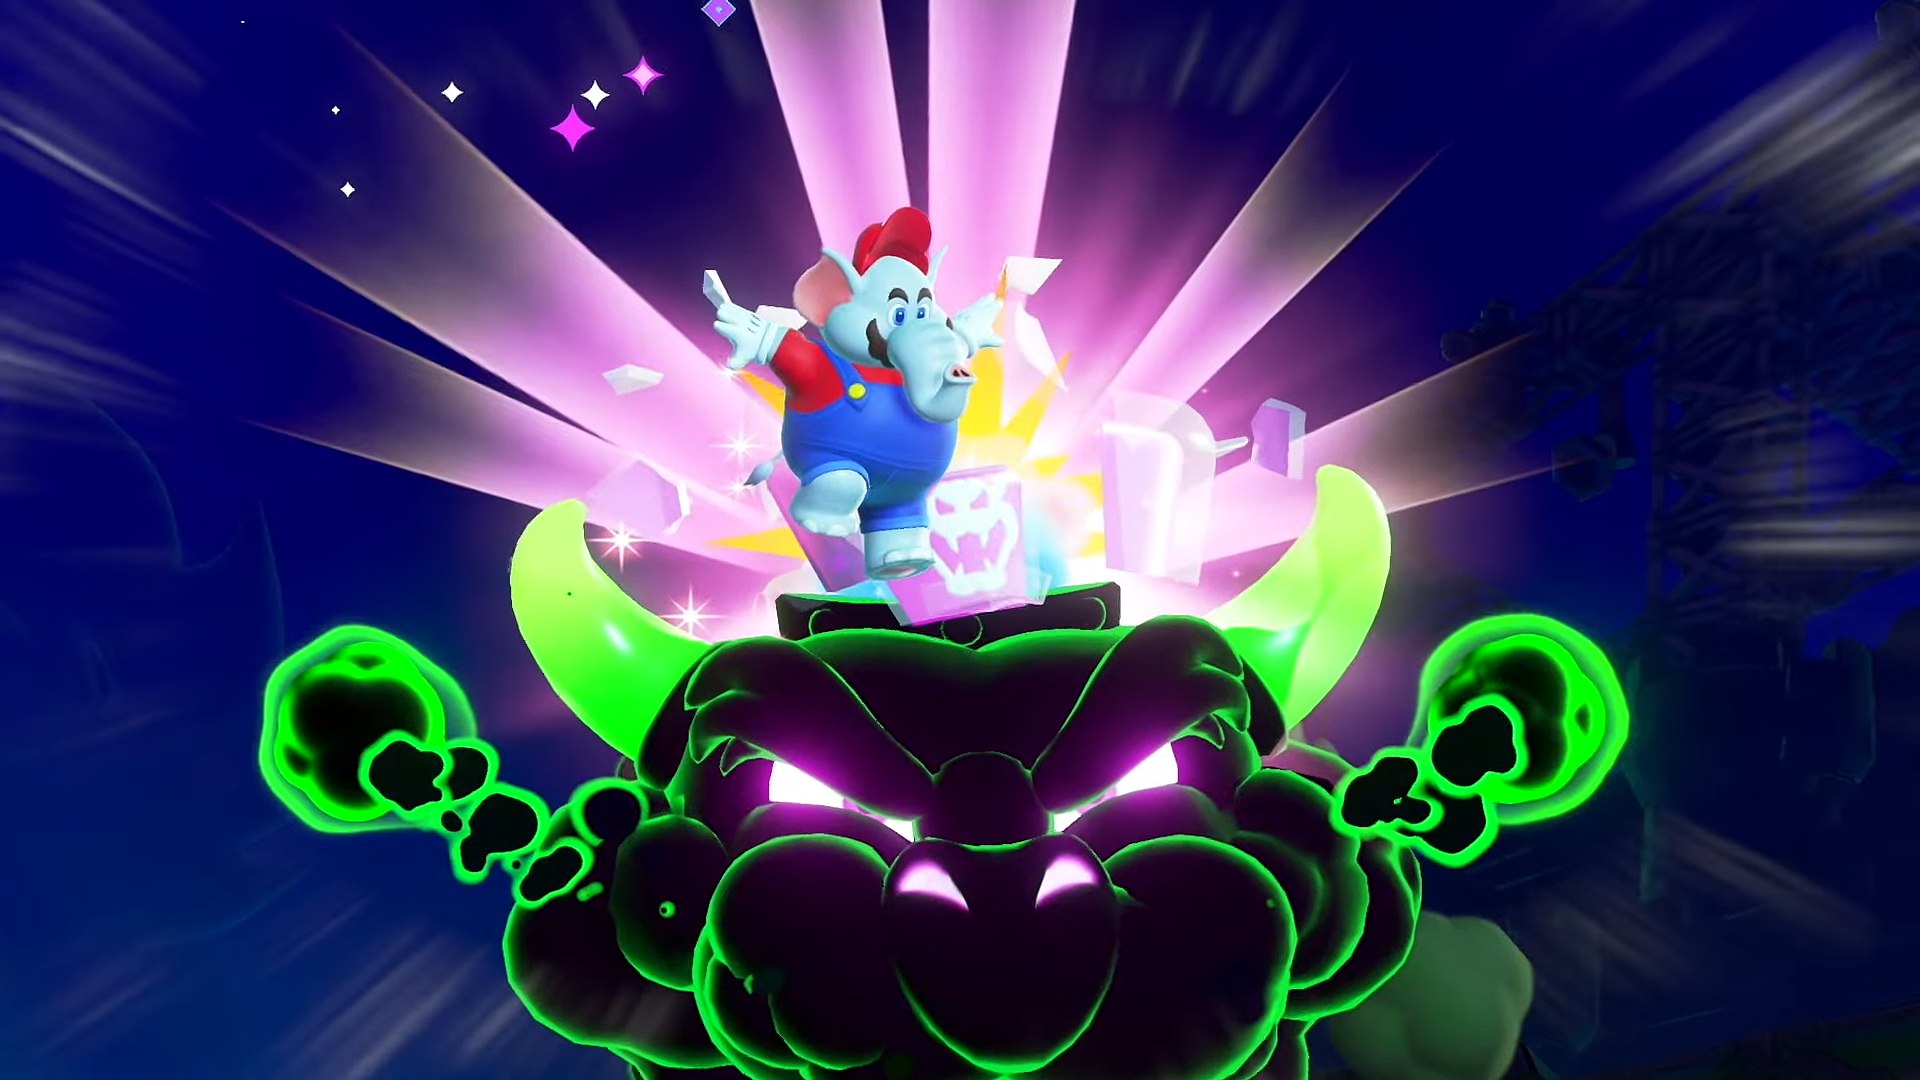 Mario in Elephant form jumping on top of Bowser's head in Super Mario Bros. Wonder